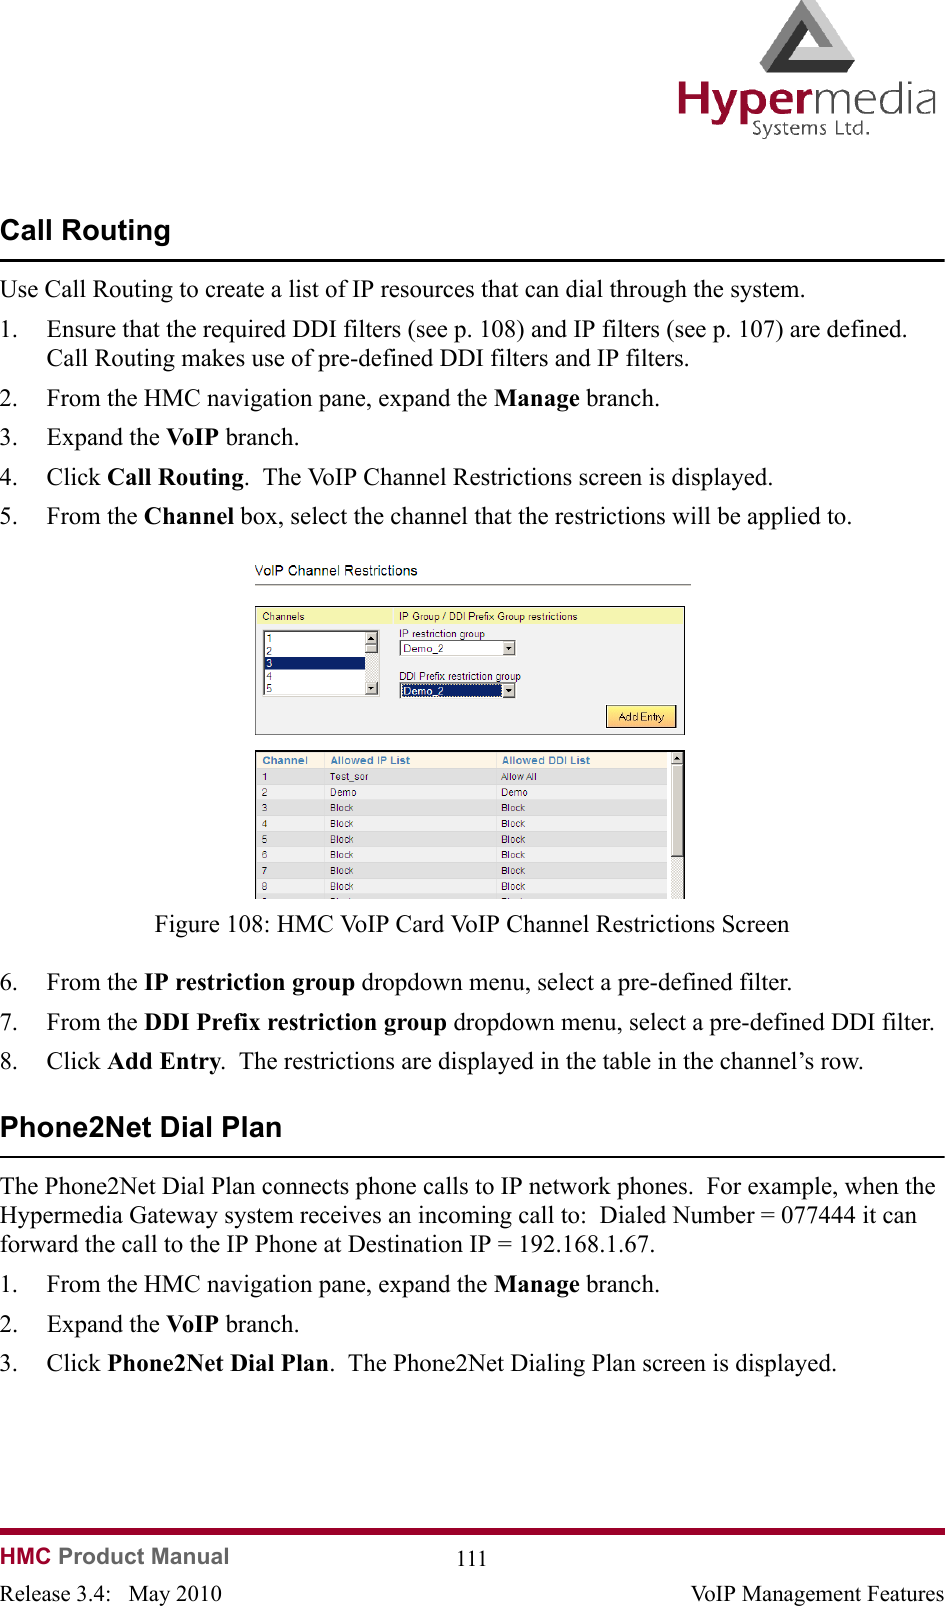 HMC Product Manual  111Release 3.4:   May 2010 VoIP Management FeaturesCall RoutingUse Call Routing to create a list of IP resources that can dial through the system.  1. Ensure that the required DDI filters (see p. 108) and IP filters (see p. 107) are defined.  Call Routing makes use of pre-defined DDI filters and IP filters.2. From the HMC navigation pane, expand the Manage branch.3. Expand the VoIP  branch.4. Click Call Routing.  The VoIP Channel Restrictions screen is displayed.5. From the Channel box, select the channel that the restrictions will be applied to.              Figure 108: HMC VoIP Card VoIP Channel Restrictions Screen6. From the IP restriction group dropdown menu, select a pre-defined filter.7. From the DDI Prefix restriction group dropdown menu, select a pre-defined DDI filter.8. Click Add Entry.  The restrictions are displayed in the table in the channel’s row.Phone2Net Dial PlanThe Phone2Net Dial Plan connects phone calls to IP network phones.  For example, when the Hypermedia Gateway system receives an incoming call to:  Dialed Number = 077444 it can forward the call to the IP Phone at Destination IP = 192.168.1.67.   1. From the HMC navigation pane, expand the Manage branch.2. Expand the VoIP  branch.3. Click Phone2Net Dial Plan.  The Phone2Net Dialing Plan screen is displayed.